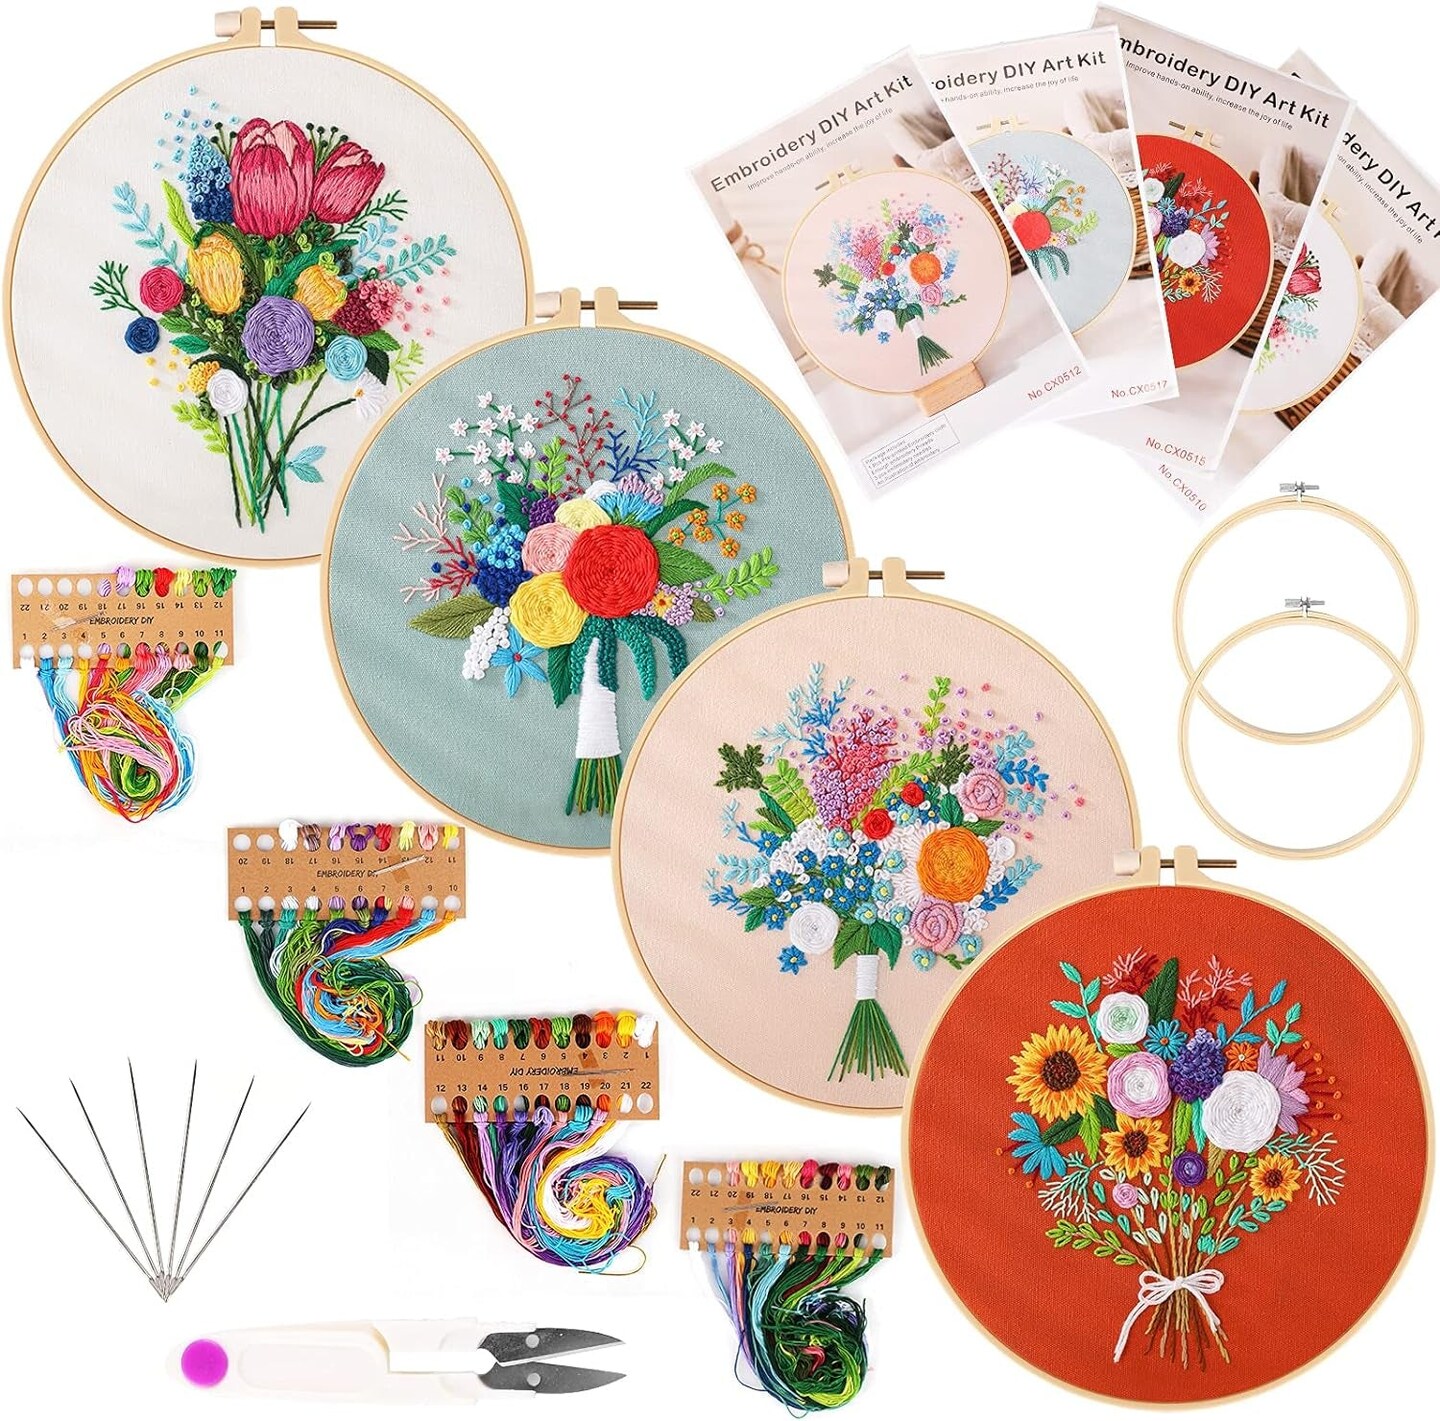 hi stone 4 Embroidery Sets for Beginners, DIY Adult Beginner Cross Stitch  Kits, 4 Cross Stitch Kits, 2 Embroidery Hoops,Scissors,Needles and Color